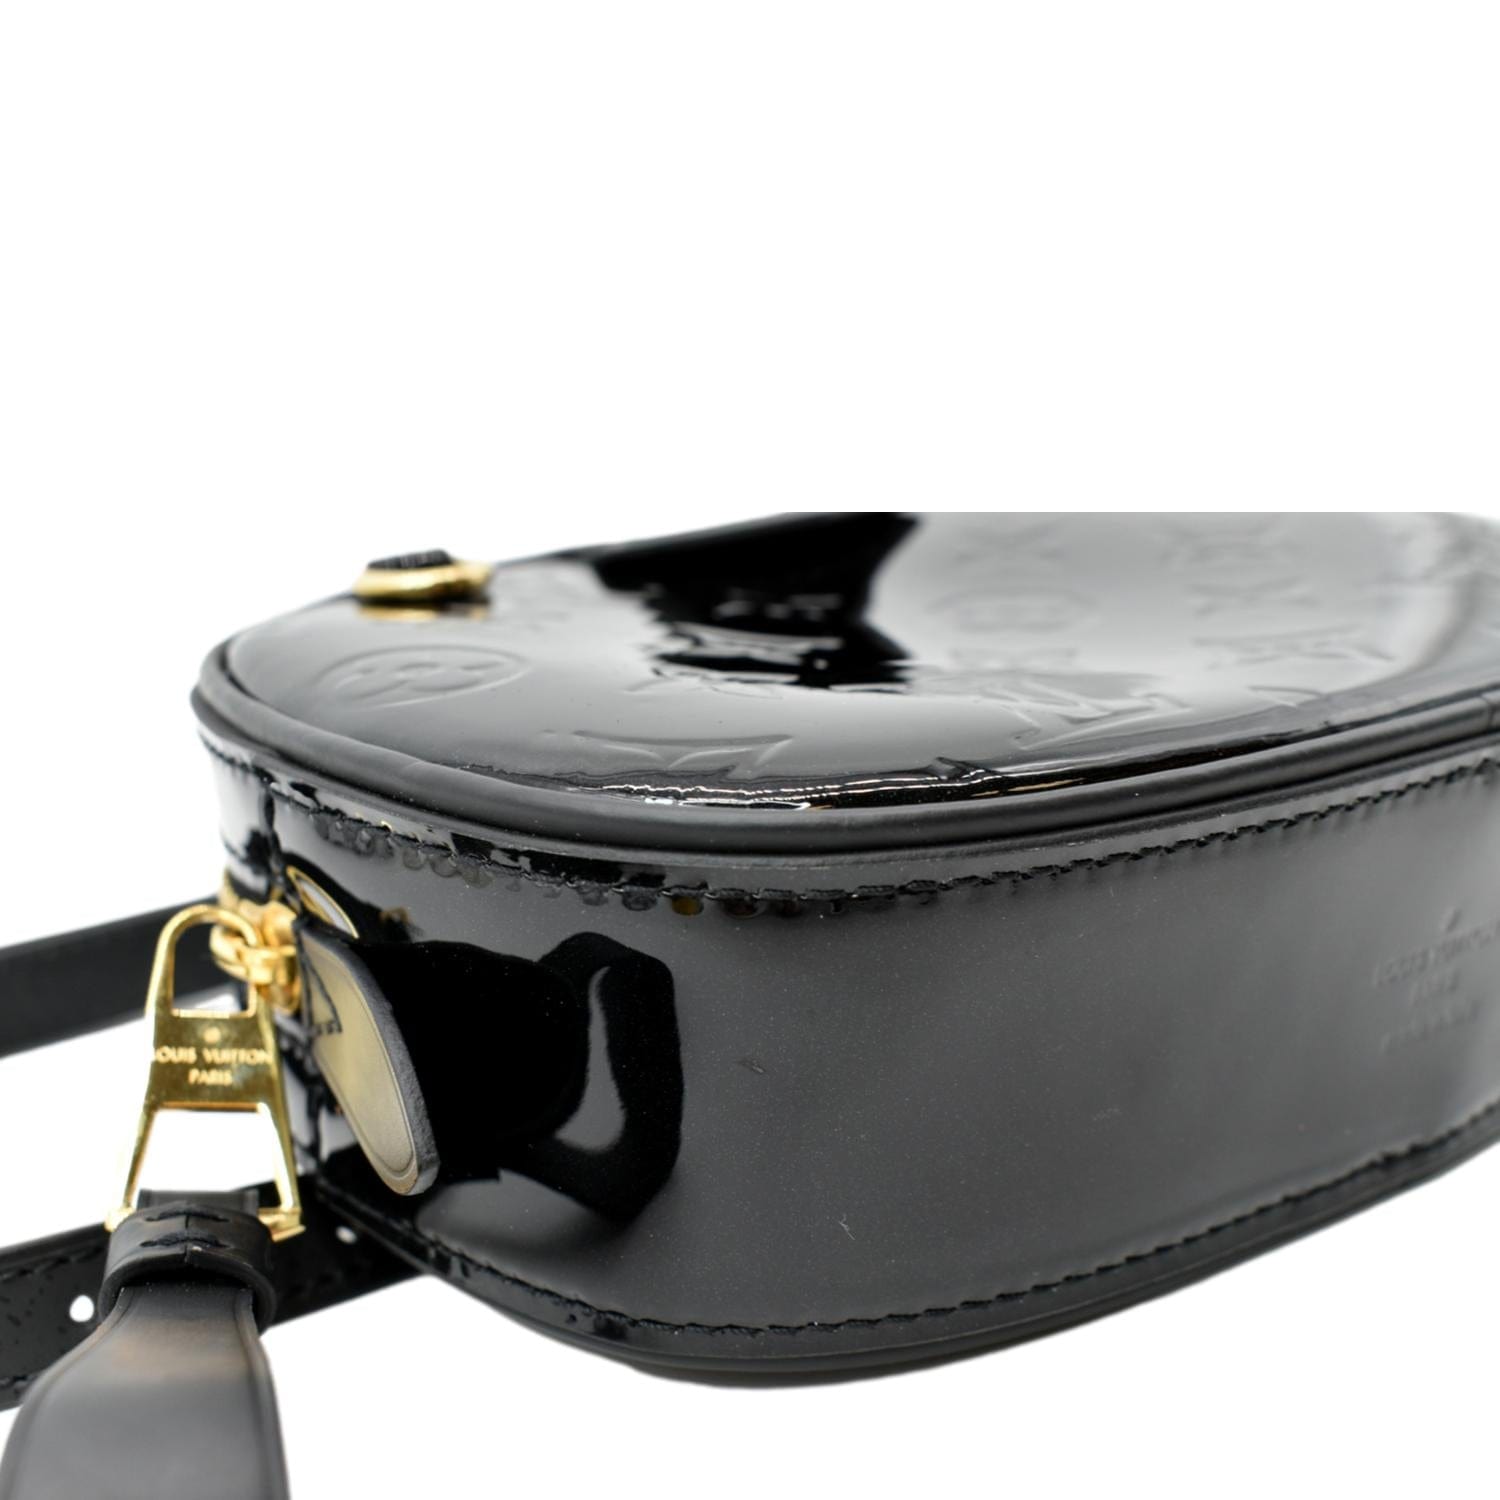 Louis Vuitton Round Convertible Belt Bag, Black Vernis Patent Leather, New  in Box WA001